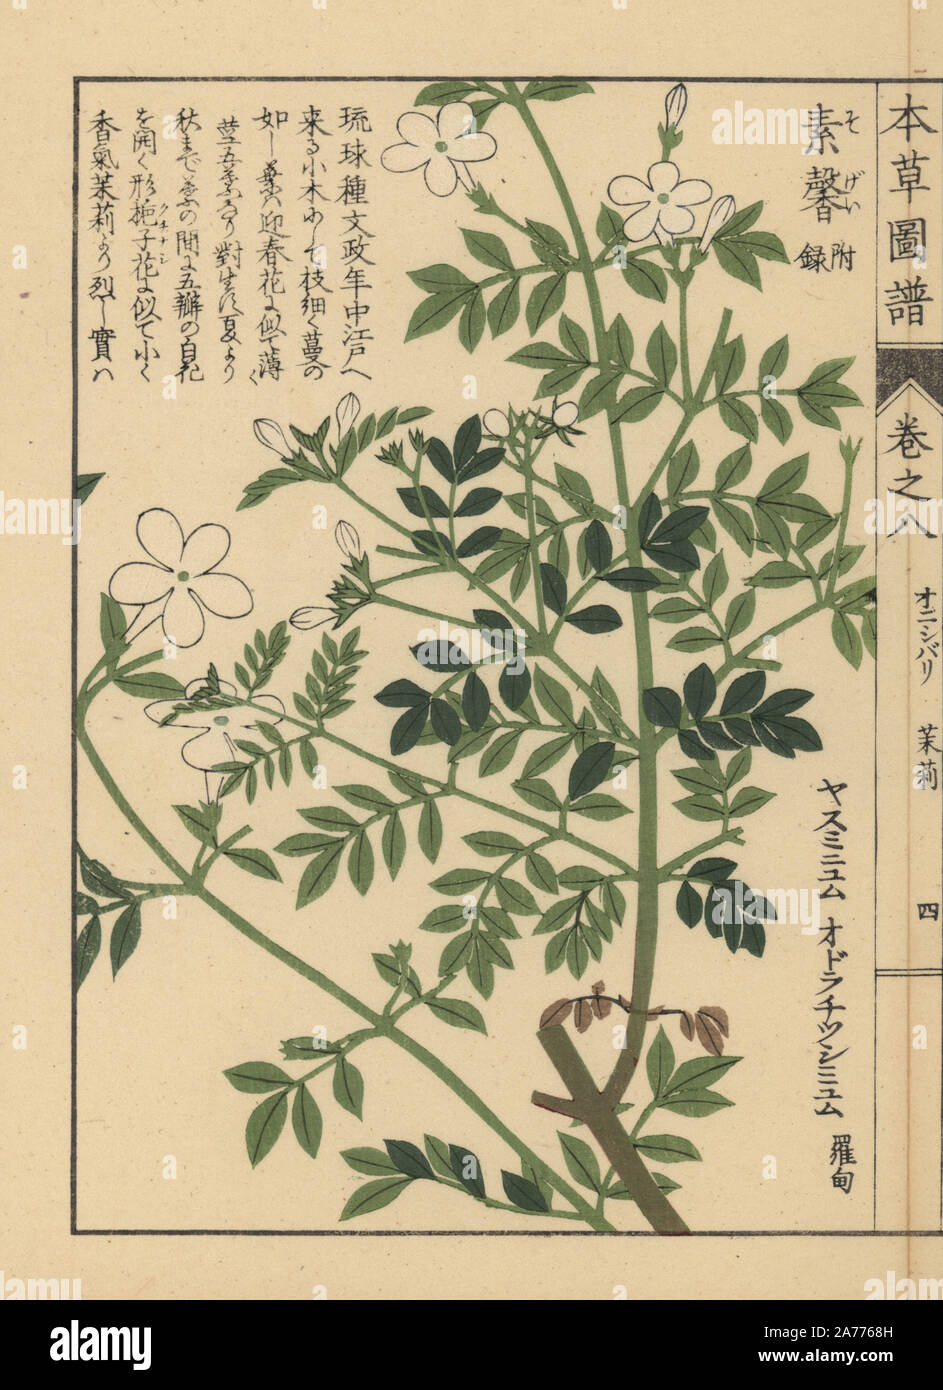 Spanish jasmine, Jasminum grandiflorum. Colour-printed woodblock engraving by Kan'en Iwasaki from 'Honzo Zufu,' an Illustrated Guide to Medicinal Plants, Japan, 1884. Iwasaki (1786-1842) was a Japanese botanist, entomologist and zoologist. He was one of the first Japanese botanists to incorporate western knowledge into his studies. Stock Photo